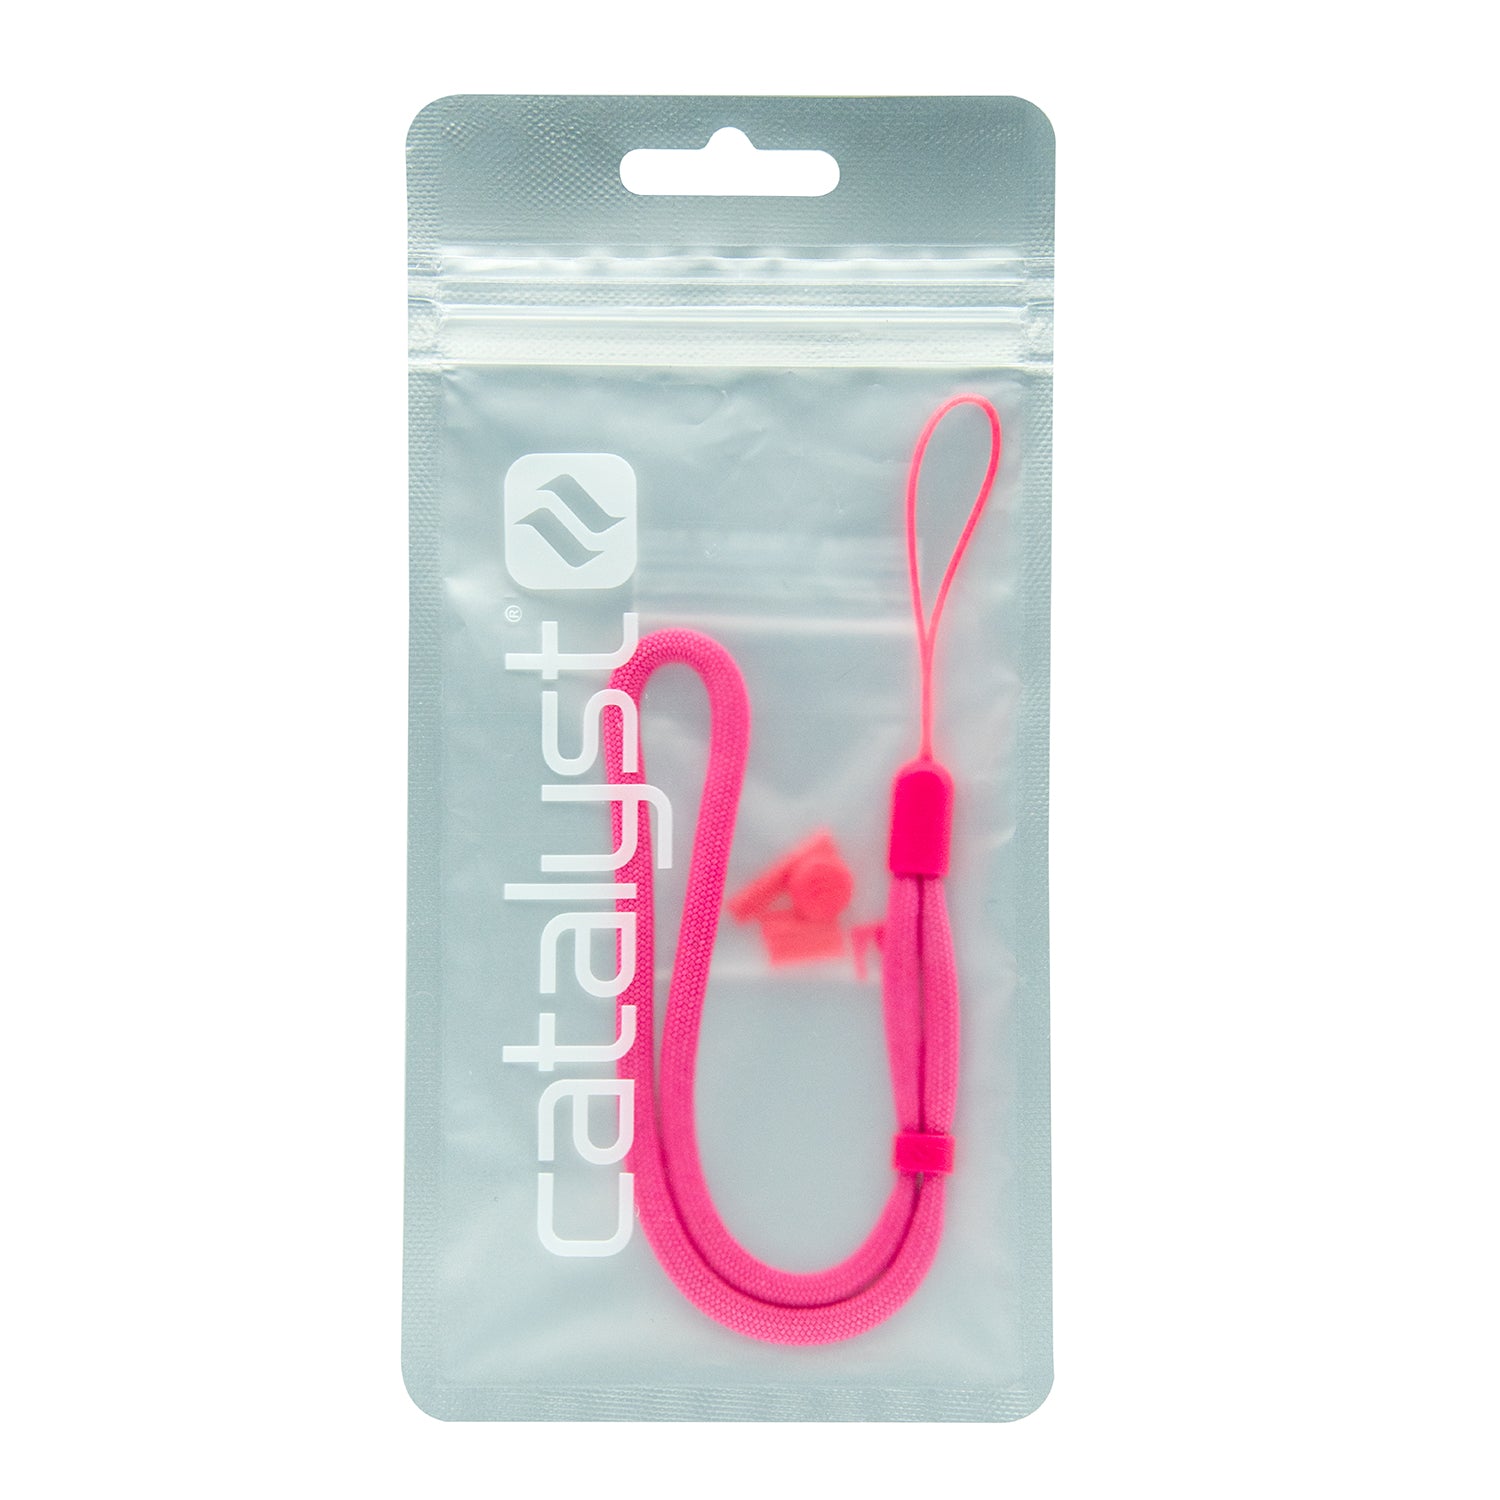 catalyst colored lanyard & buttons neon pink inside the packaging